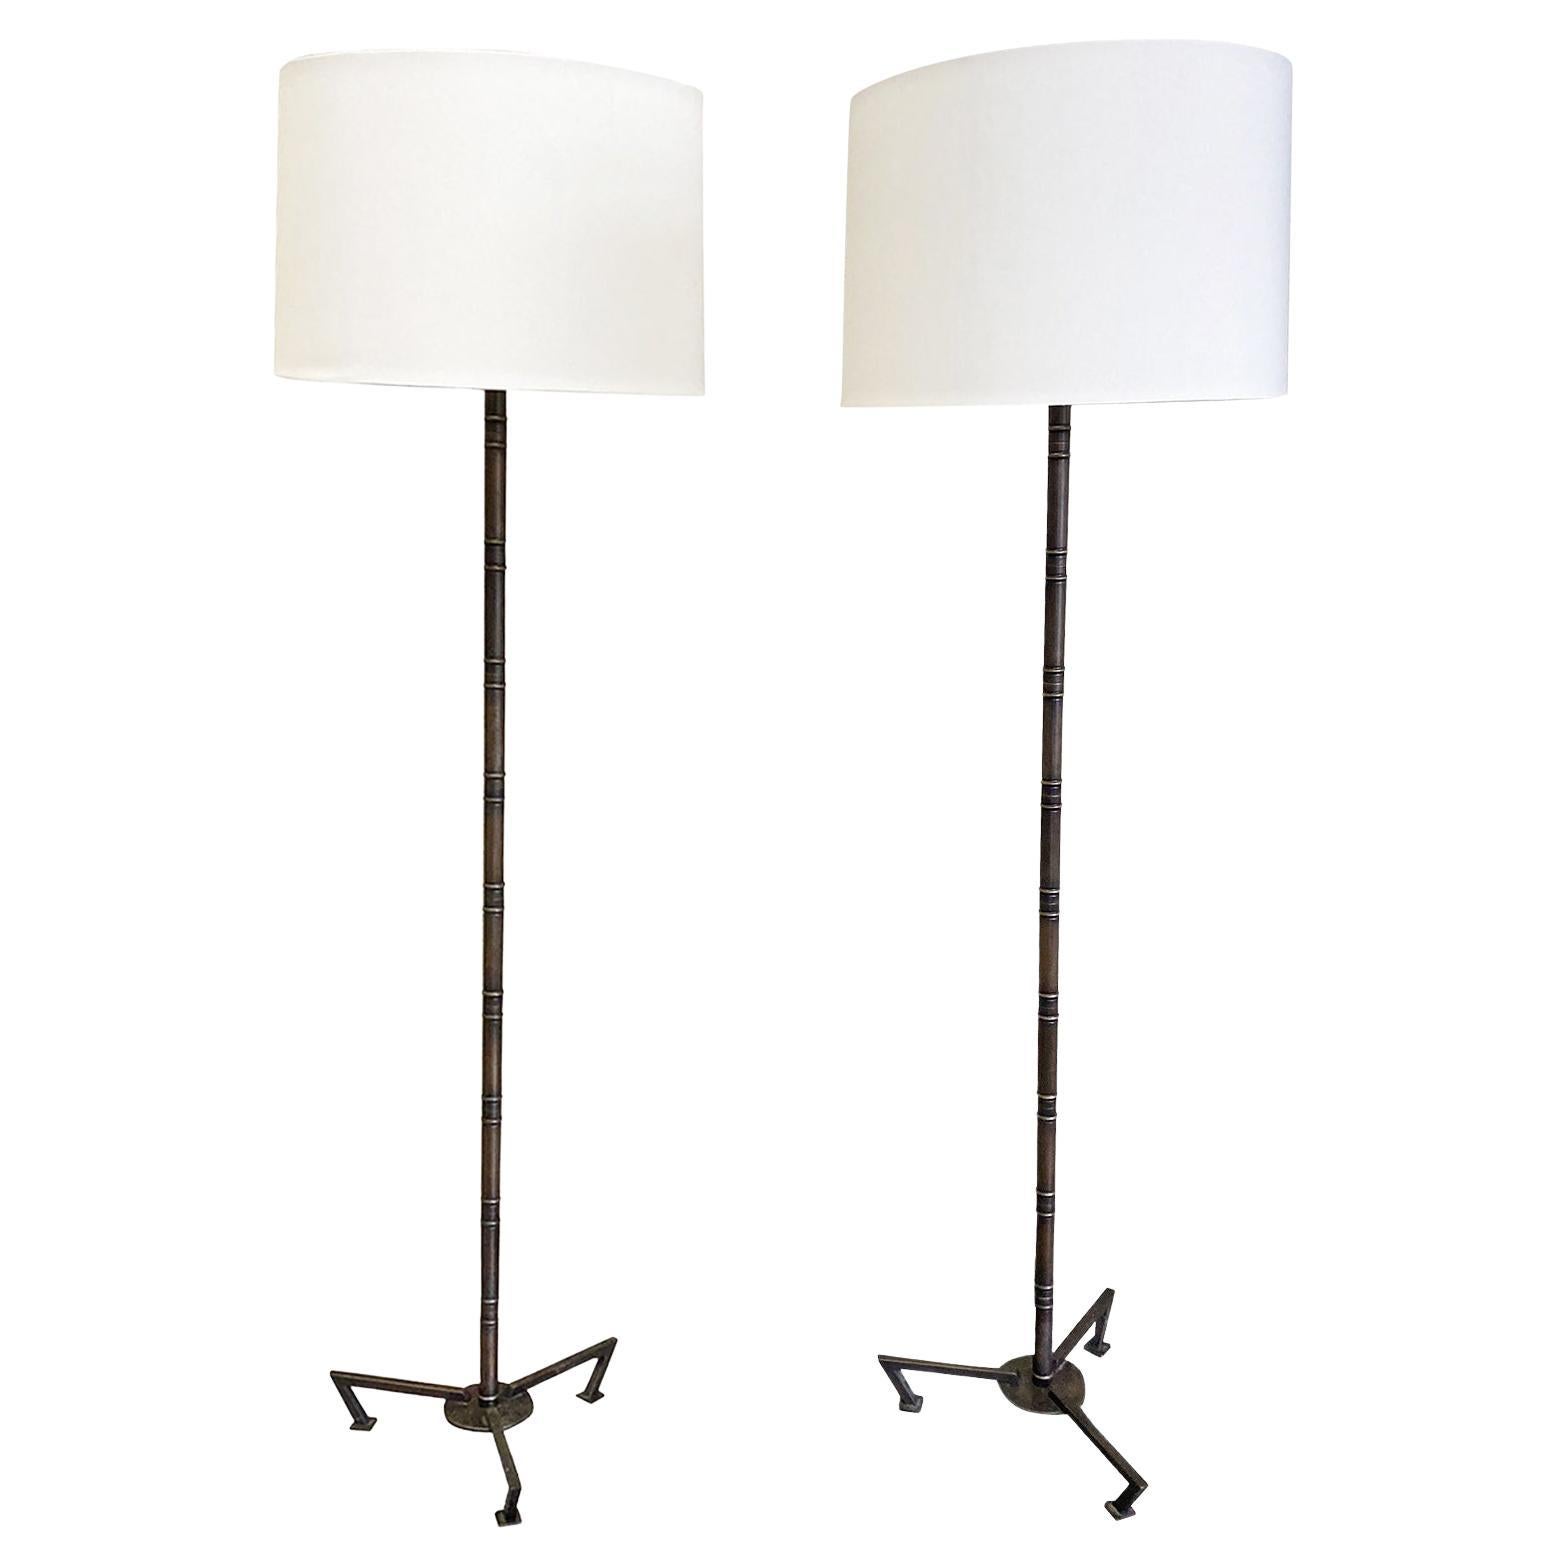 Pair of Mid-Century Modern Style Patinated Brass Floor Lamps